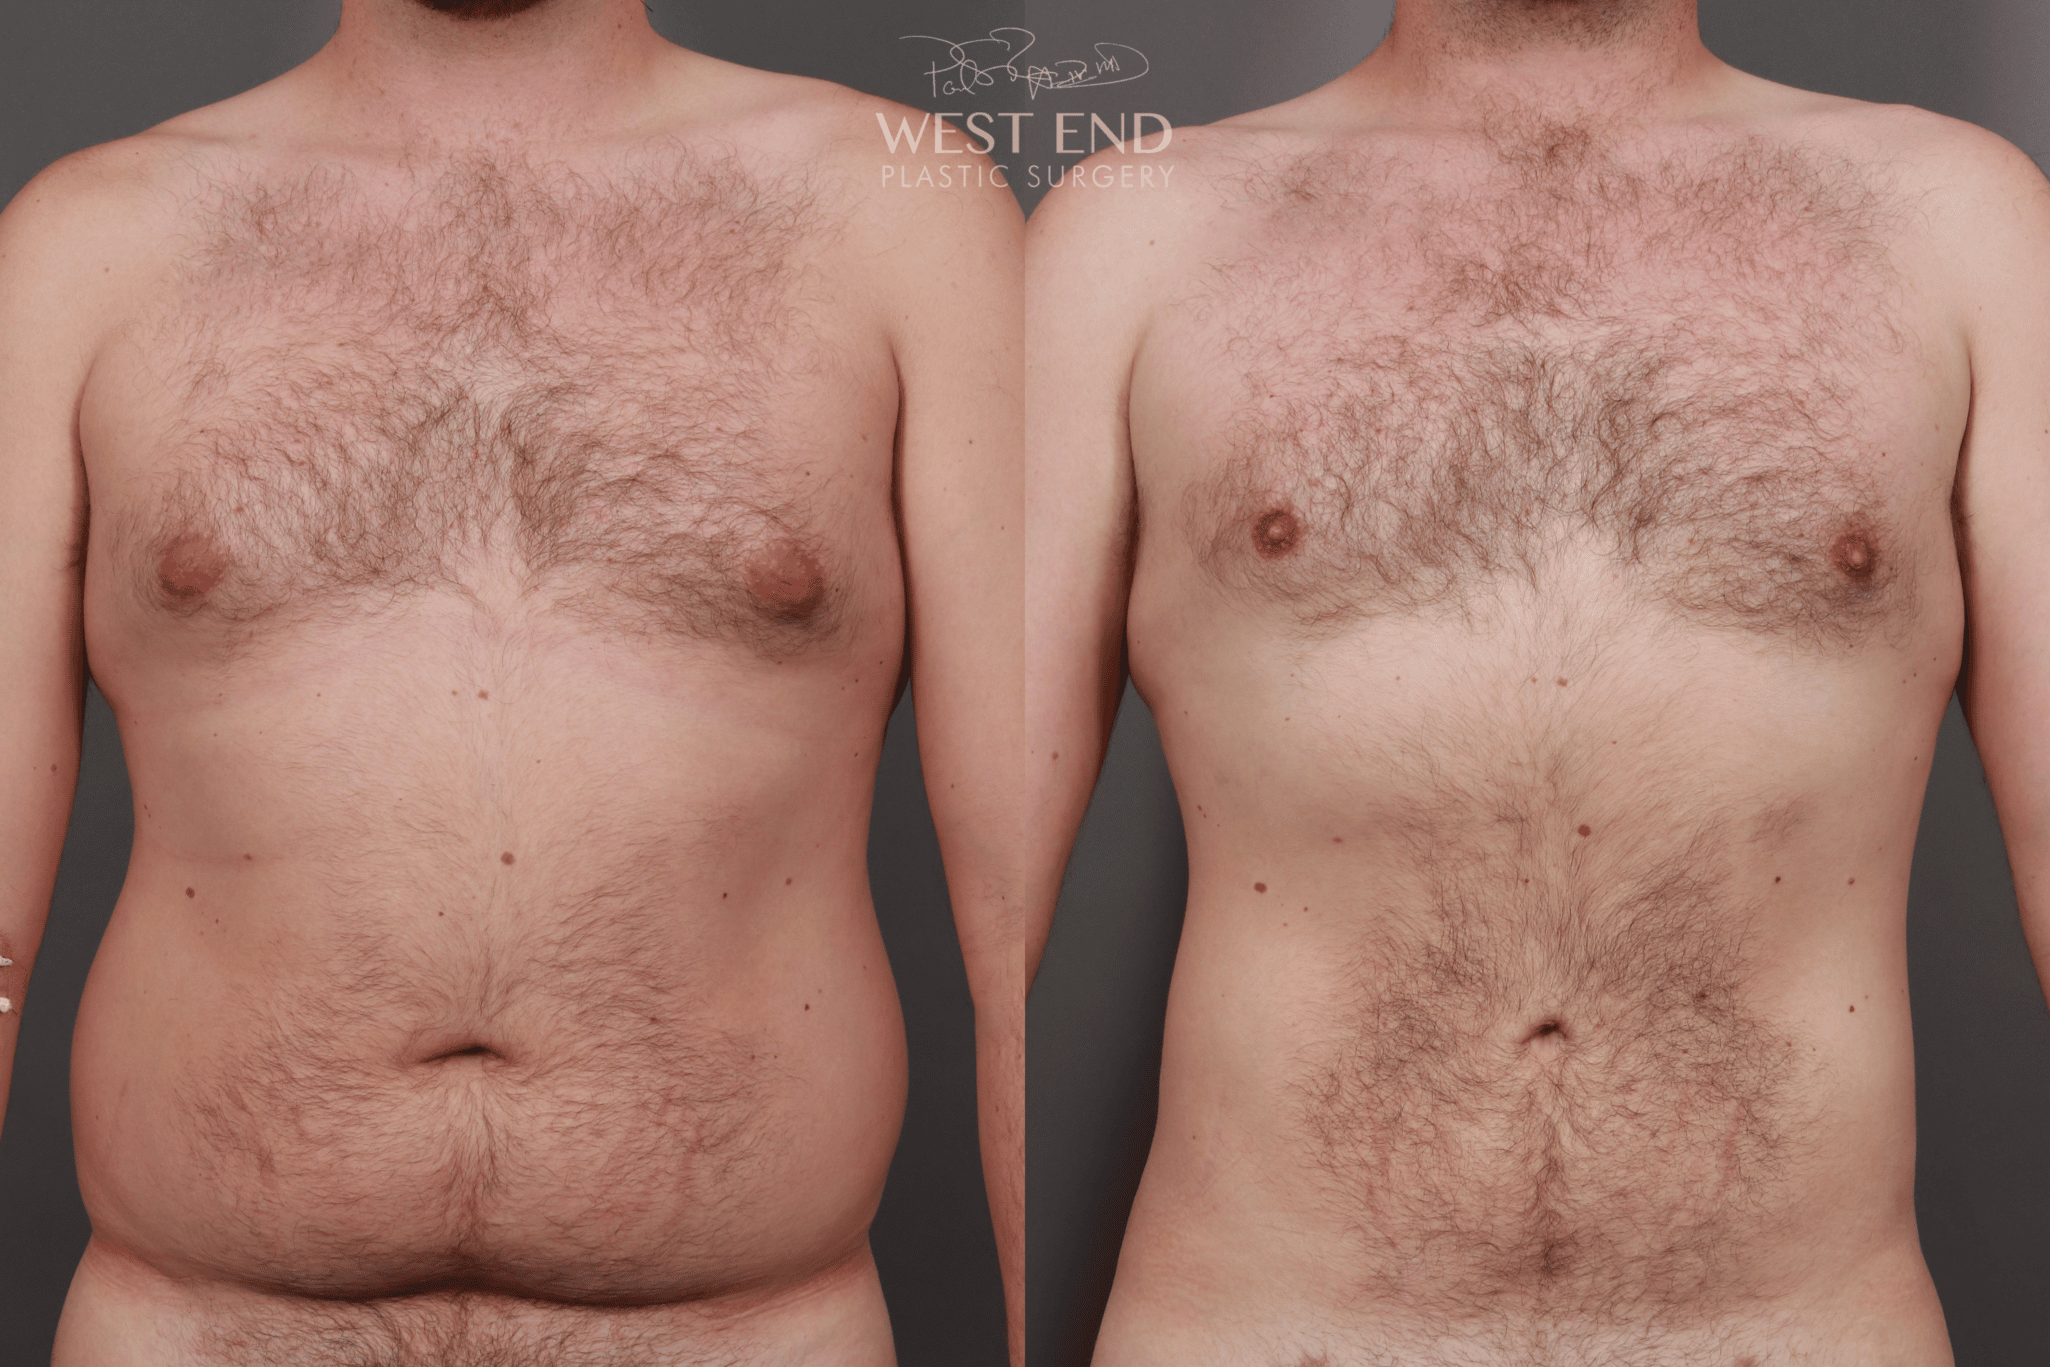 topless male patient before and after renuvion body sculpting, stomach flatter after procedure